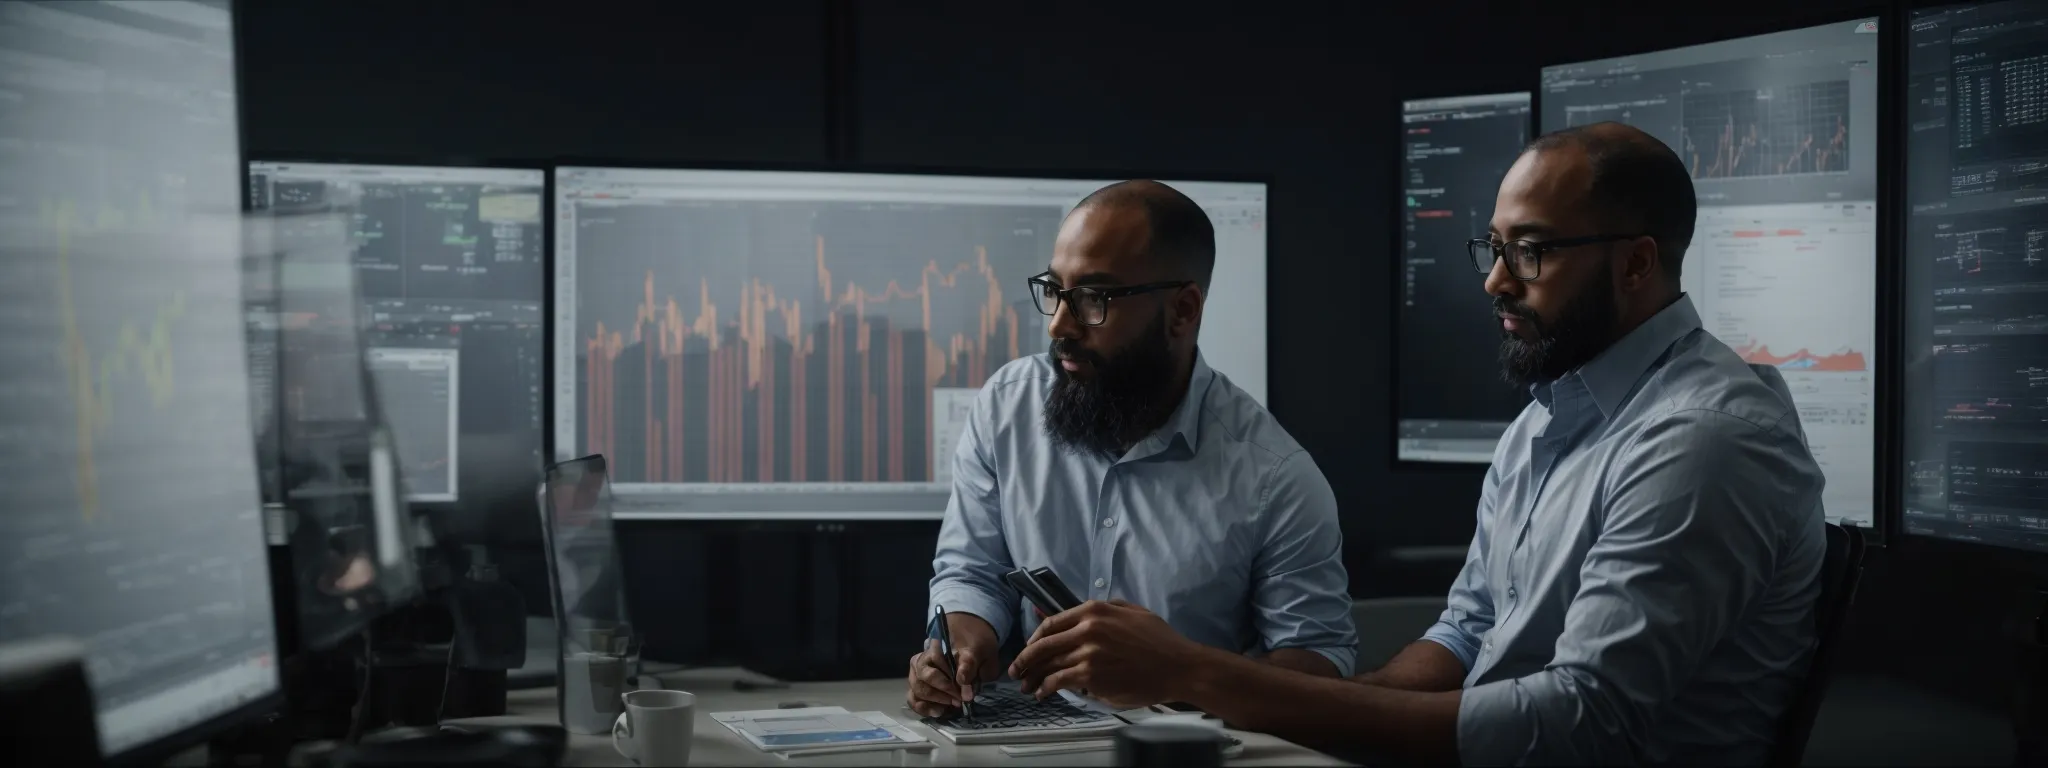 a team of marketers analyzes data graphs on digital screens to strategize their next move in a high-tech office environment.